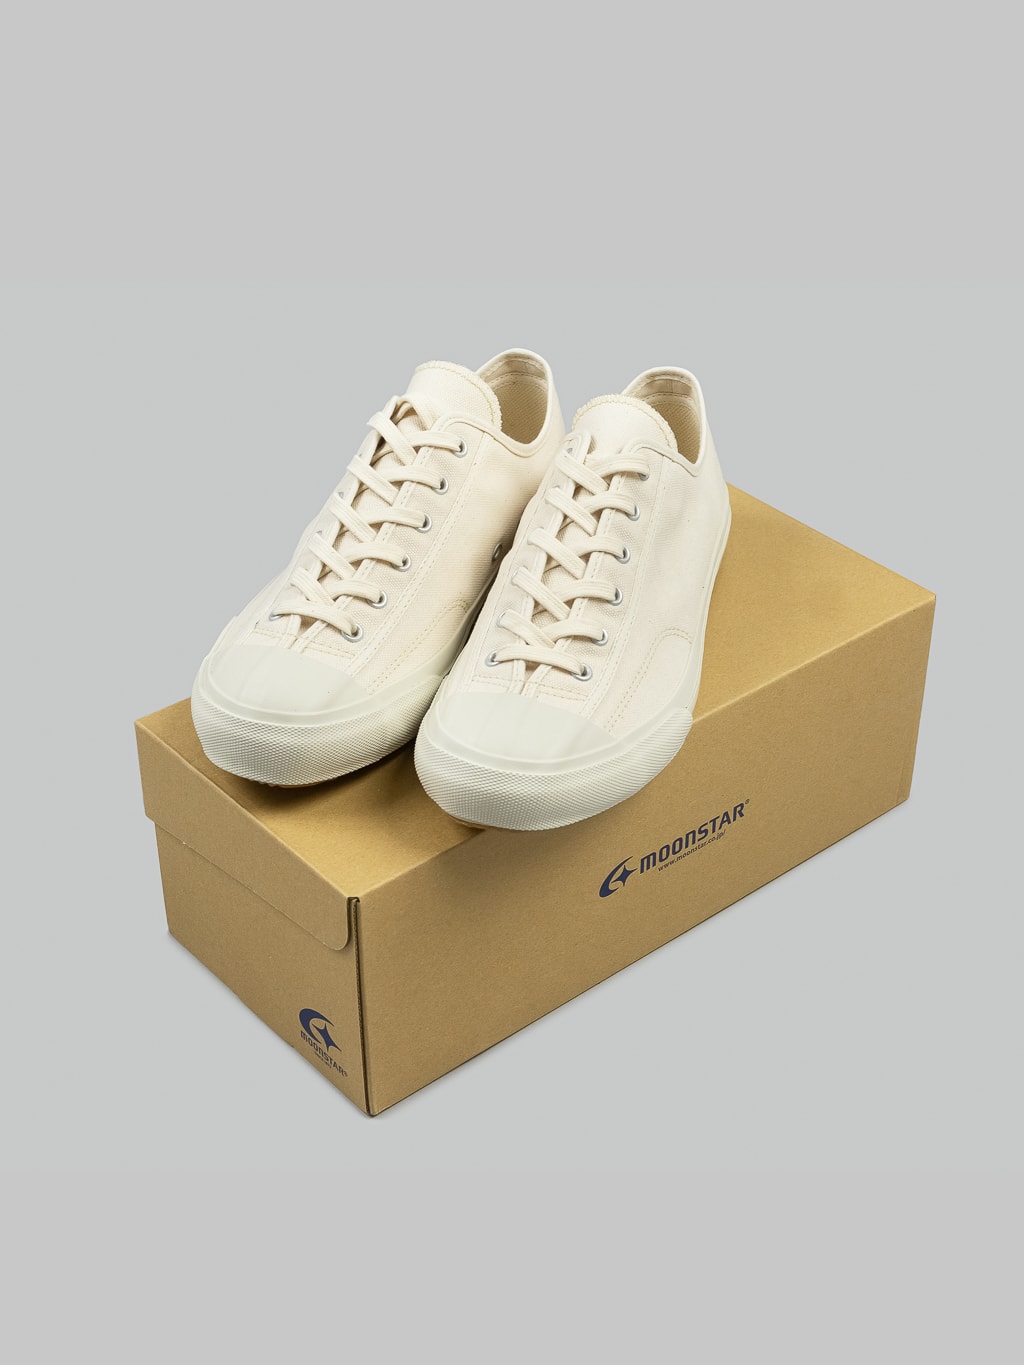 Moonstar Gym Classic White Sneakers box